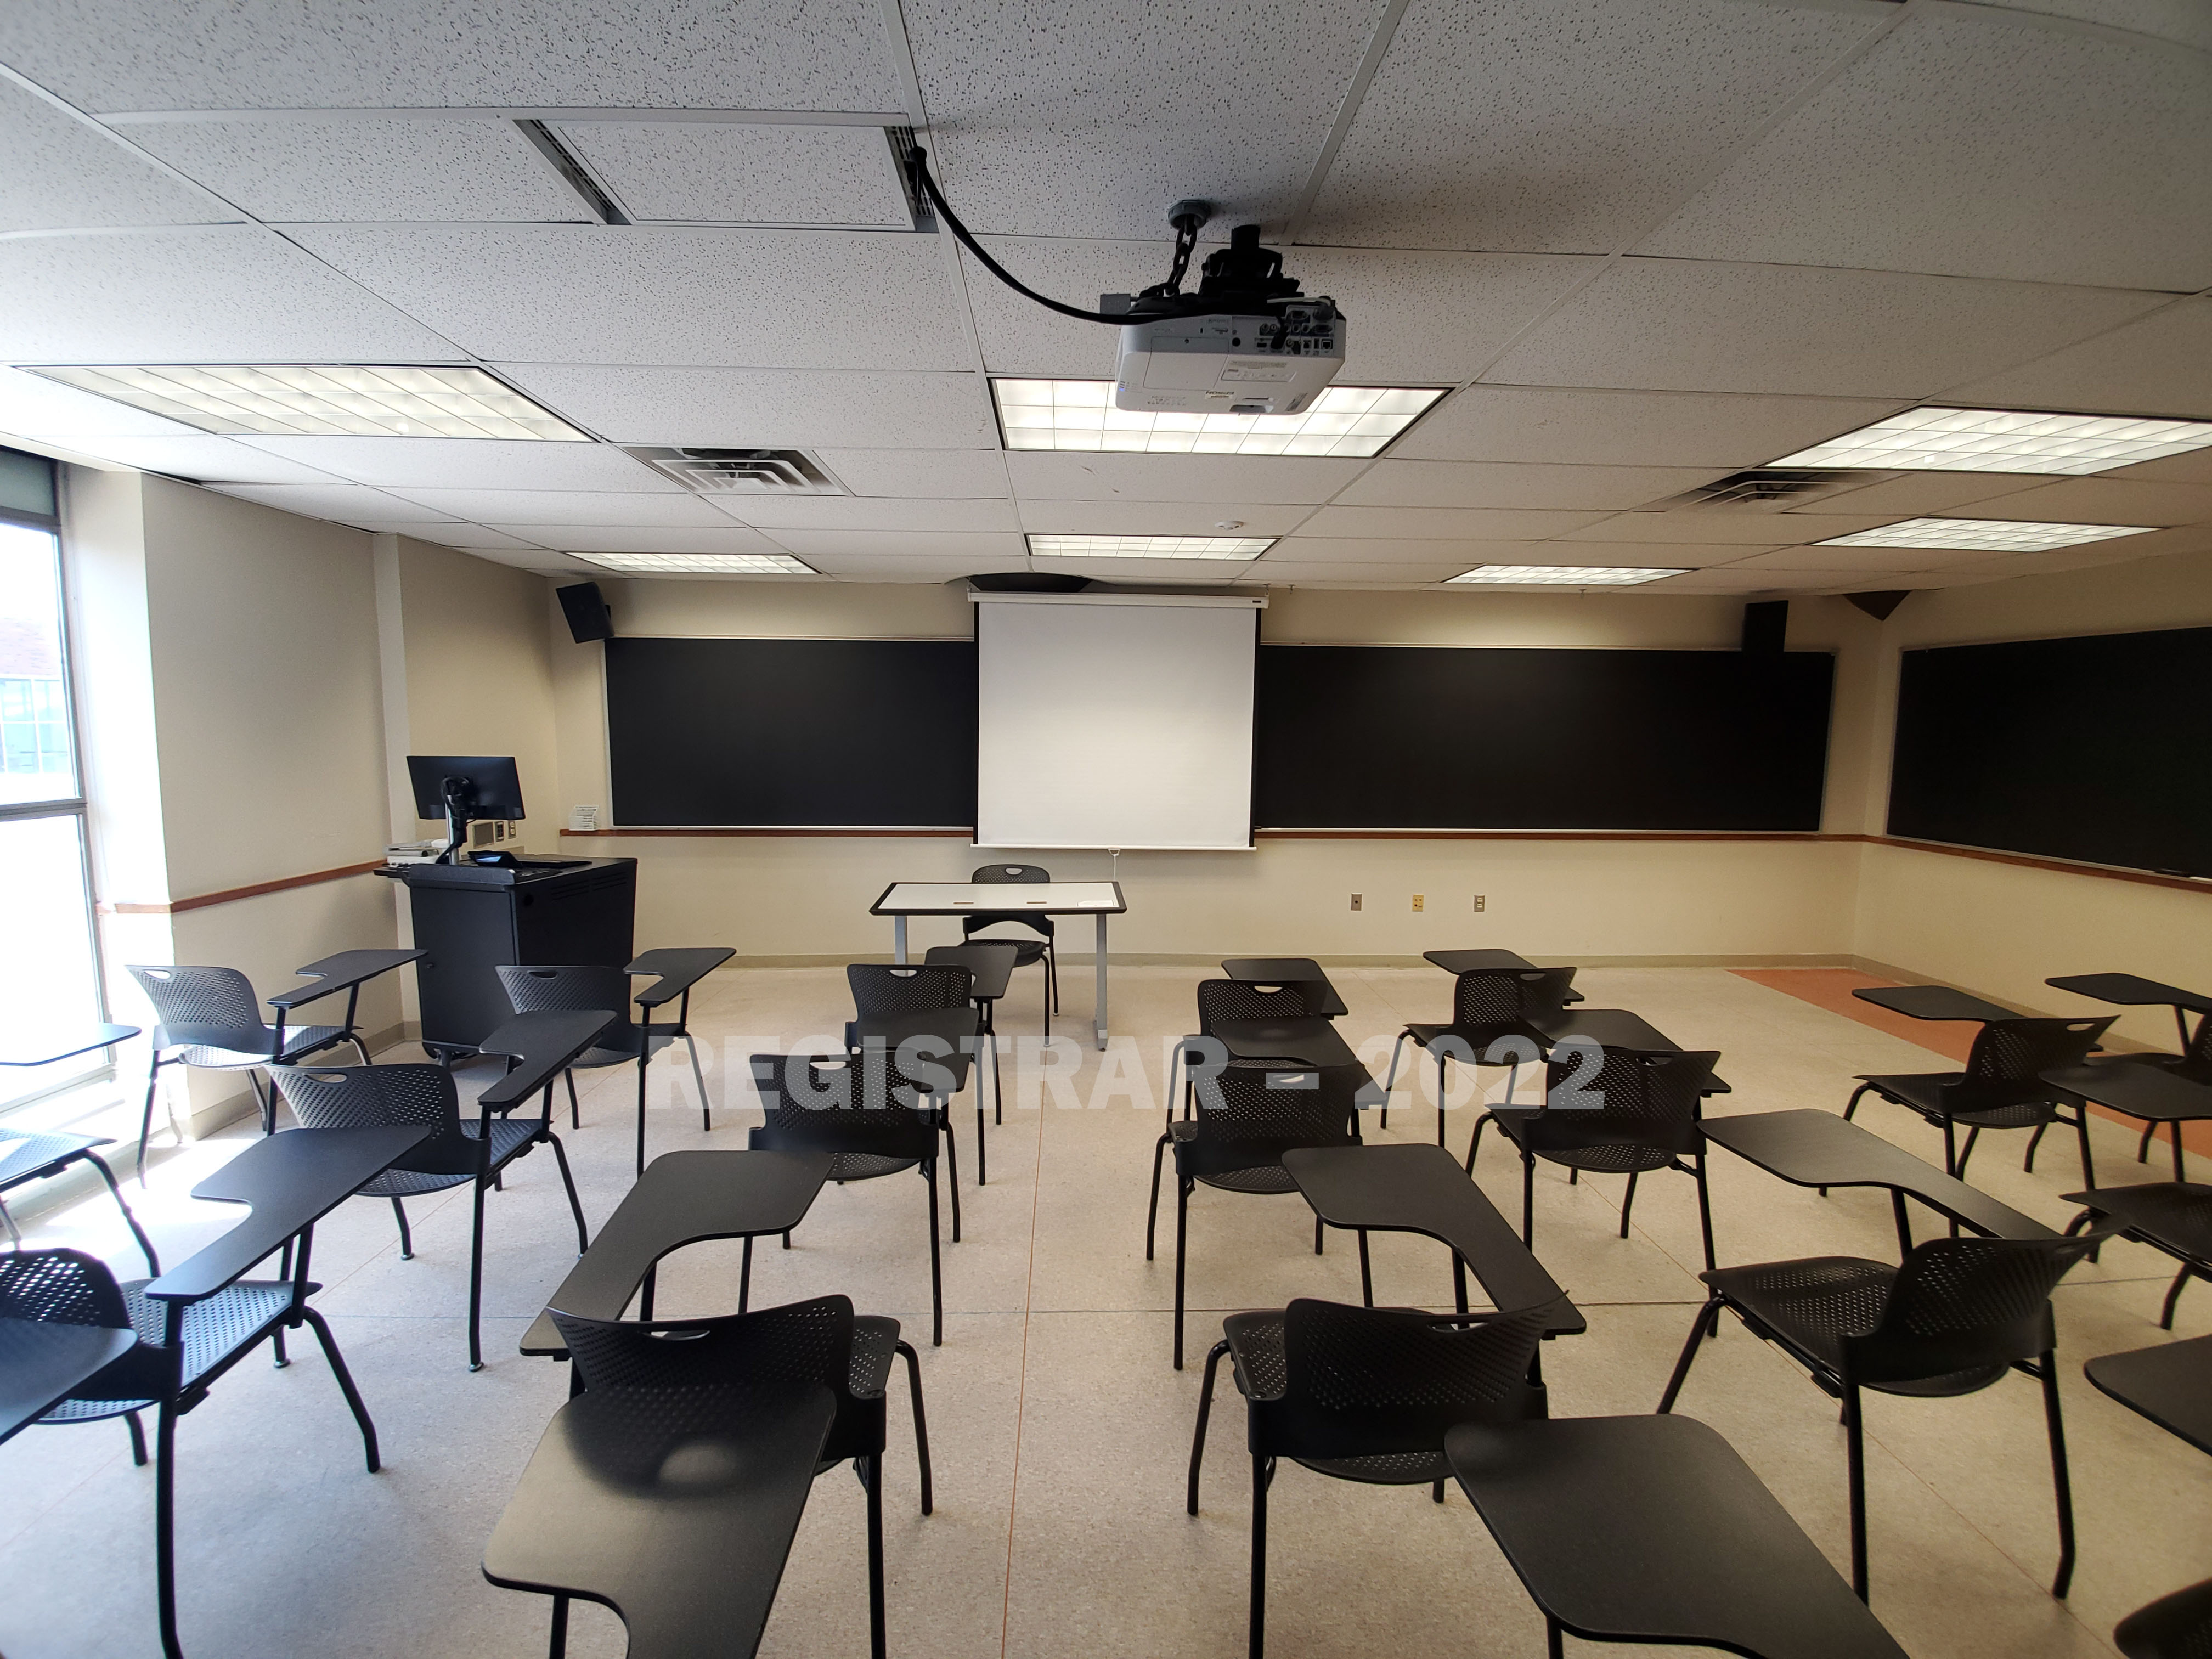 Enarson Classroom Building room 358 ultra wide angle view from the back of the room with projector screen down